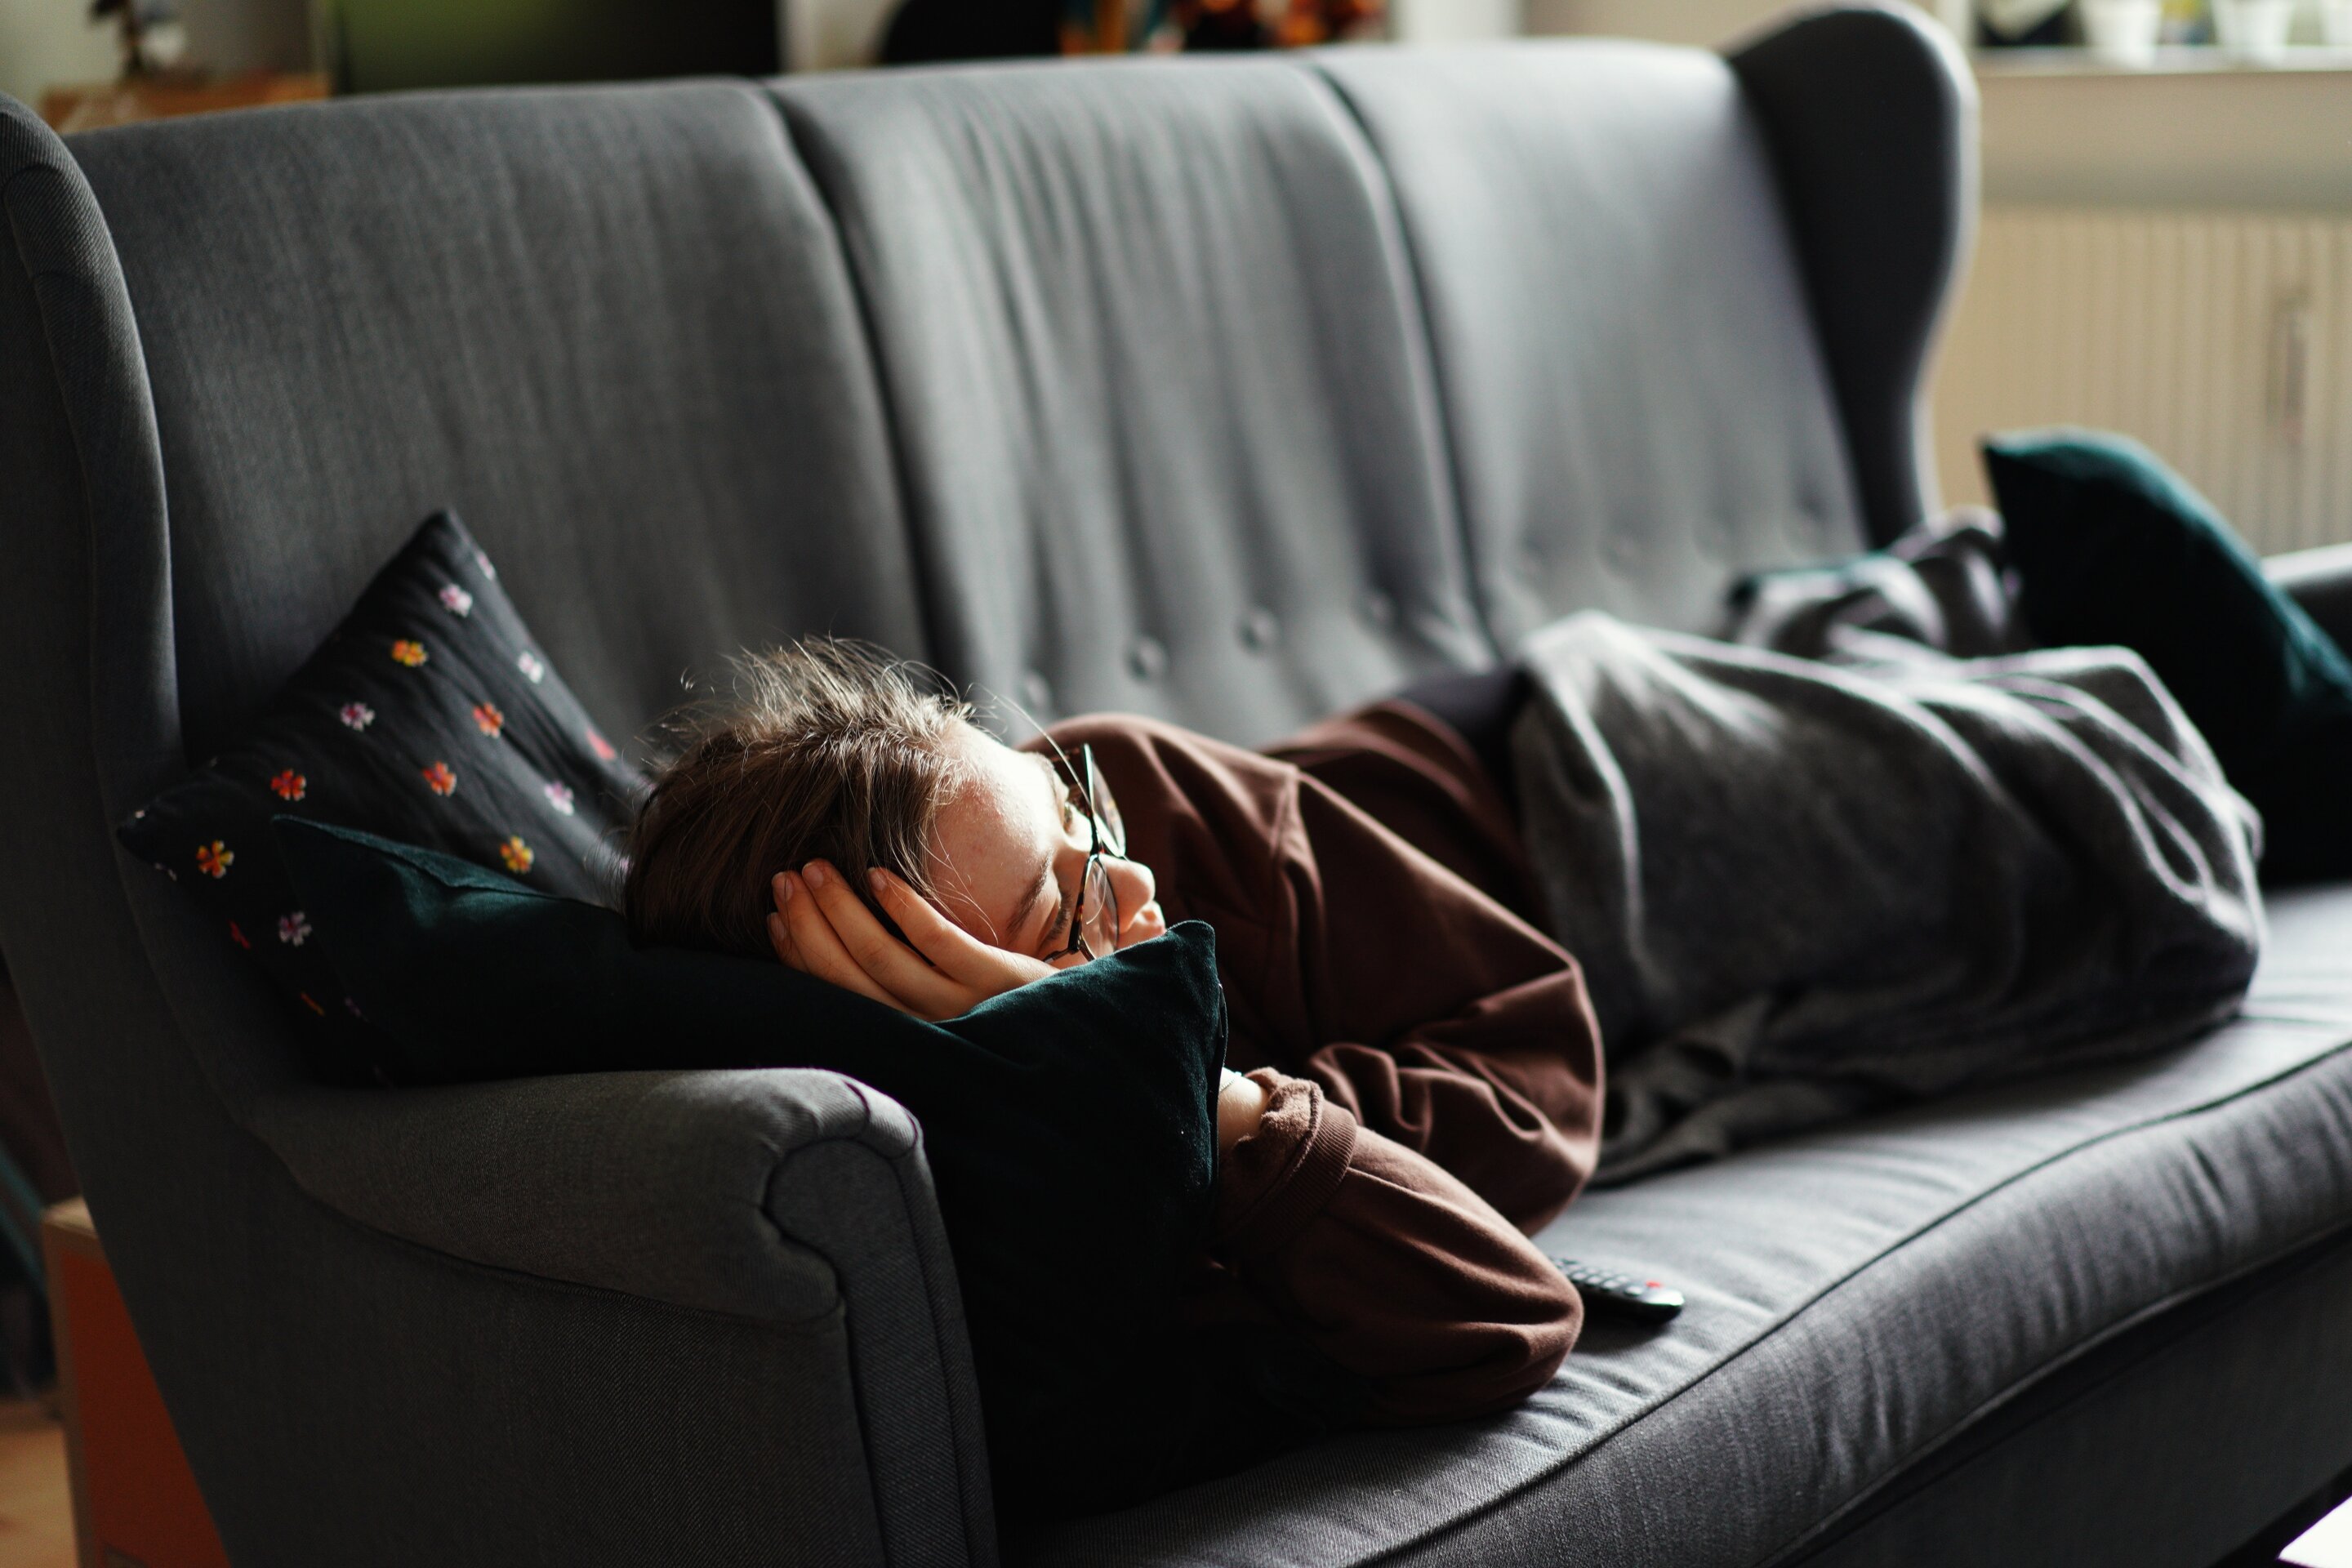 #How to get the most out of napping